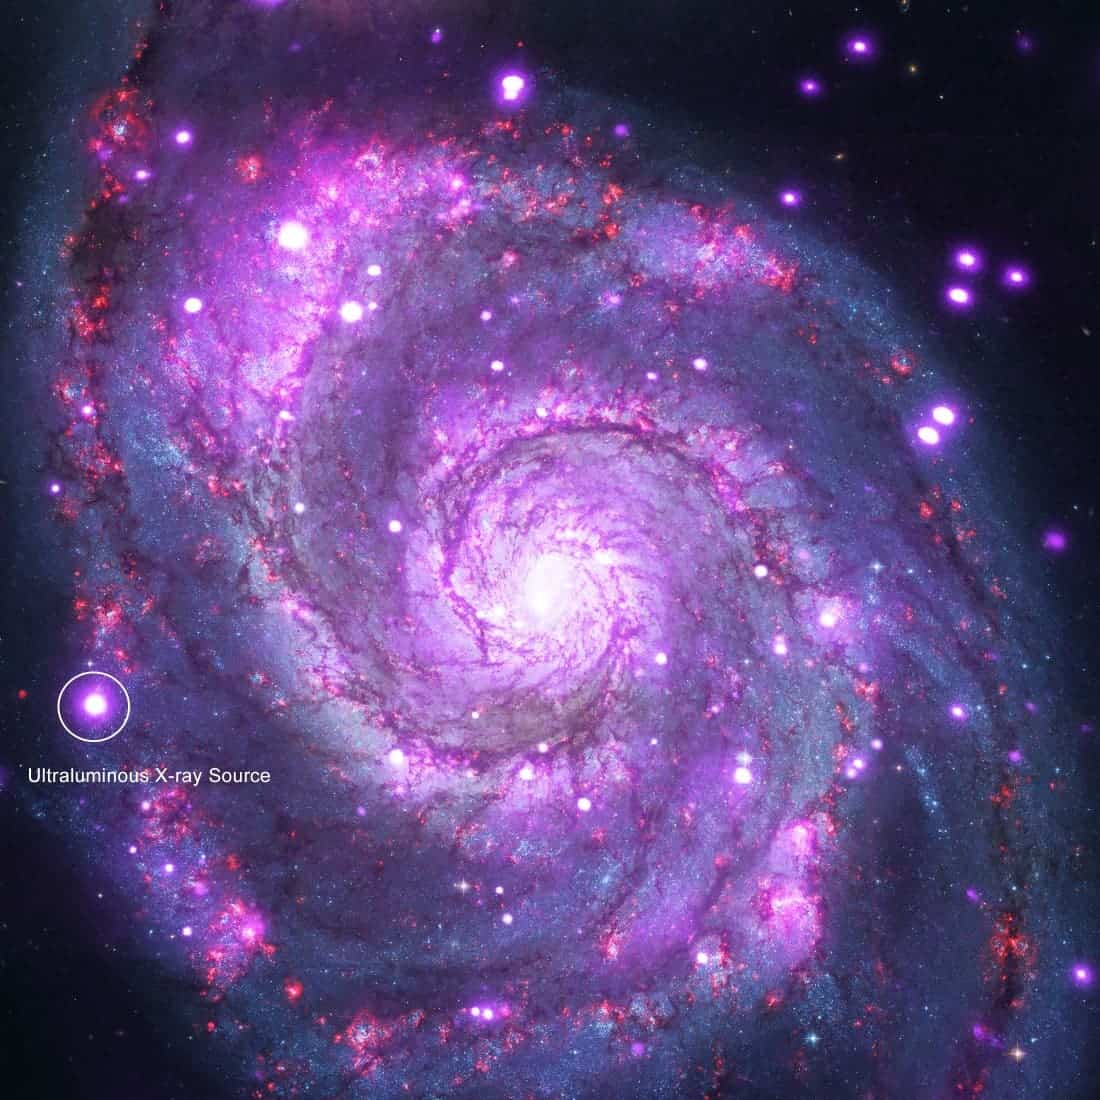 Image of the Whirlpool galaxy, or M51. X-ray light seen by NASA's Chandra X-ray Observatory is shown in purple, and optical light from NASA's Hubble Space Telescope is red, green and blue. The ultraluminous X-ray source, or ULX, in the new Caltech-led study is indicated. Image credits: NASA/CXC/Caltech/M.Brightman et al.; Optical: NASA/STScI